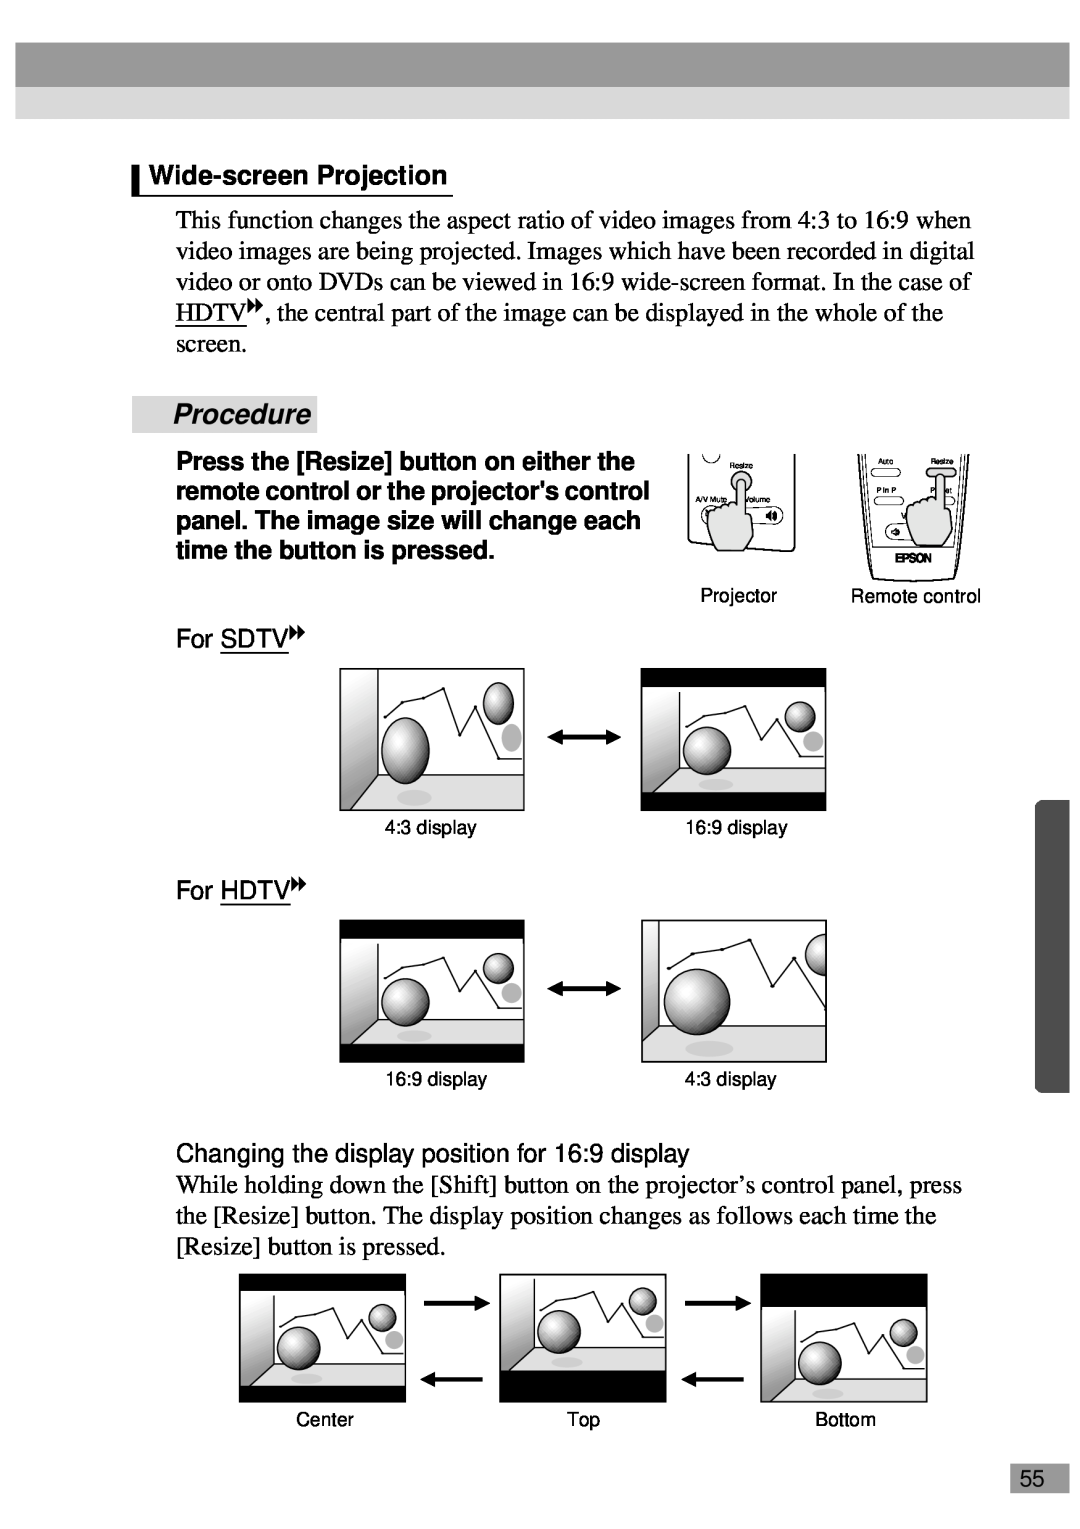 Epson ELP-820 manual Procedure, Wide-screen Projection, For SDTV, For HDTV, Changing the display position for 169 display 